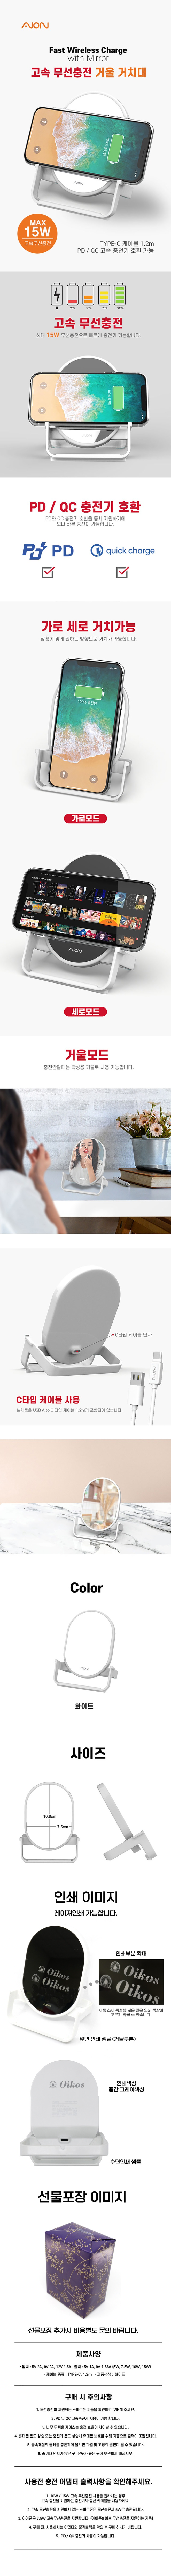 aion-fast-wireless-charge-with-mirror.jpg